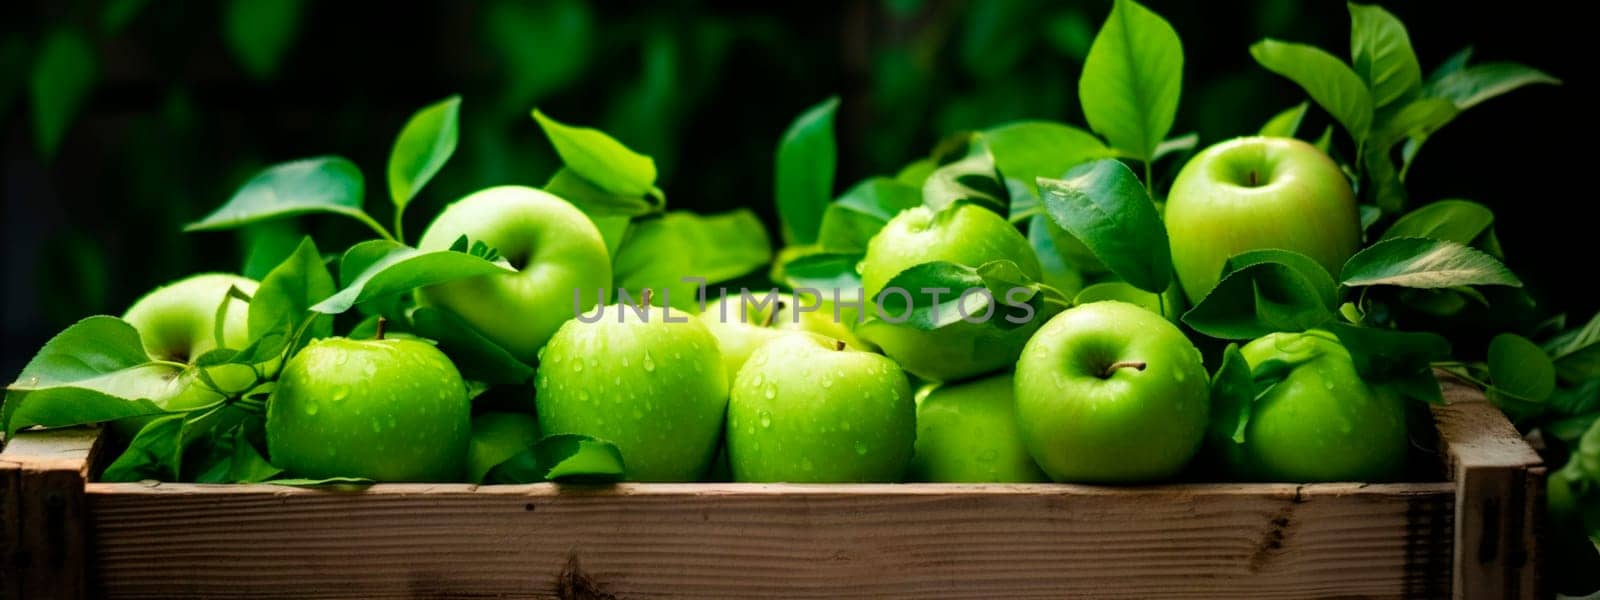 Harvest of green apples in a box in the garden. Selective focus. Food.